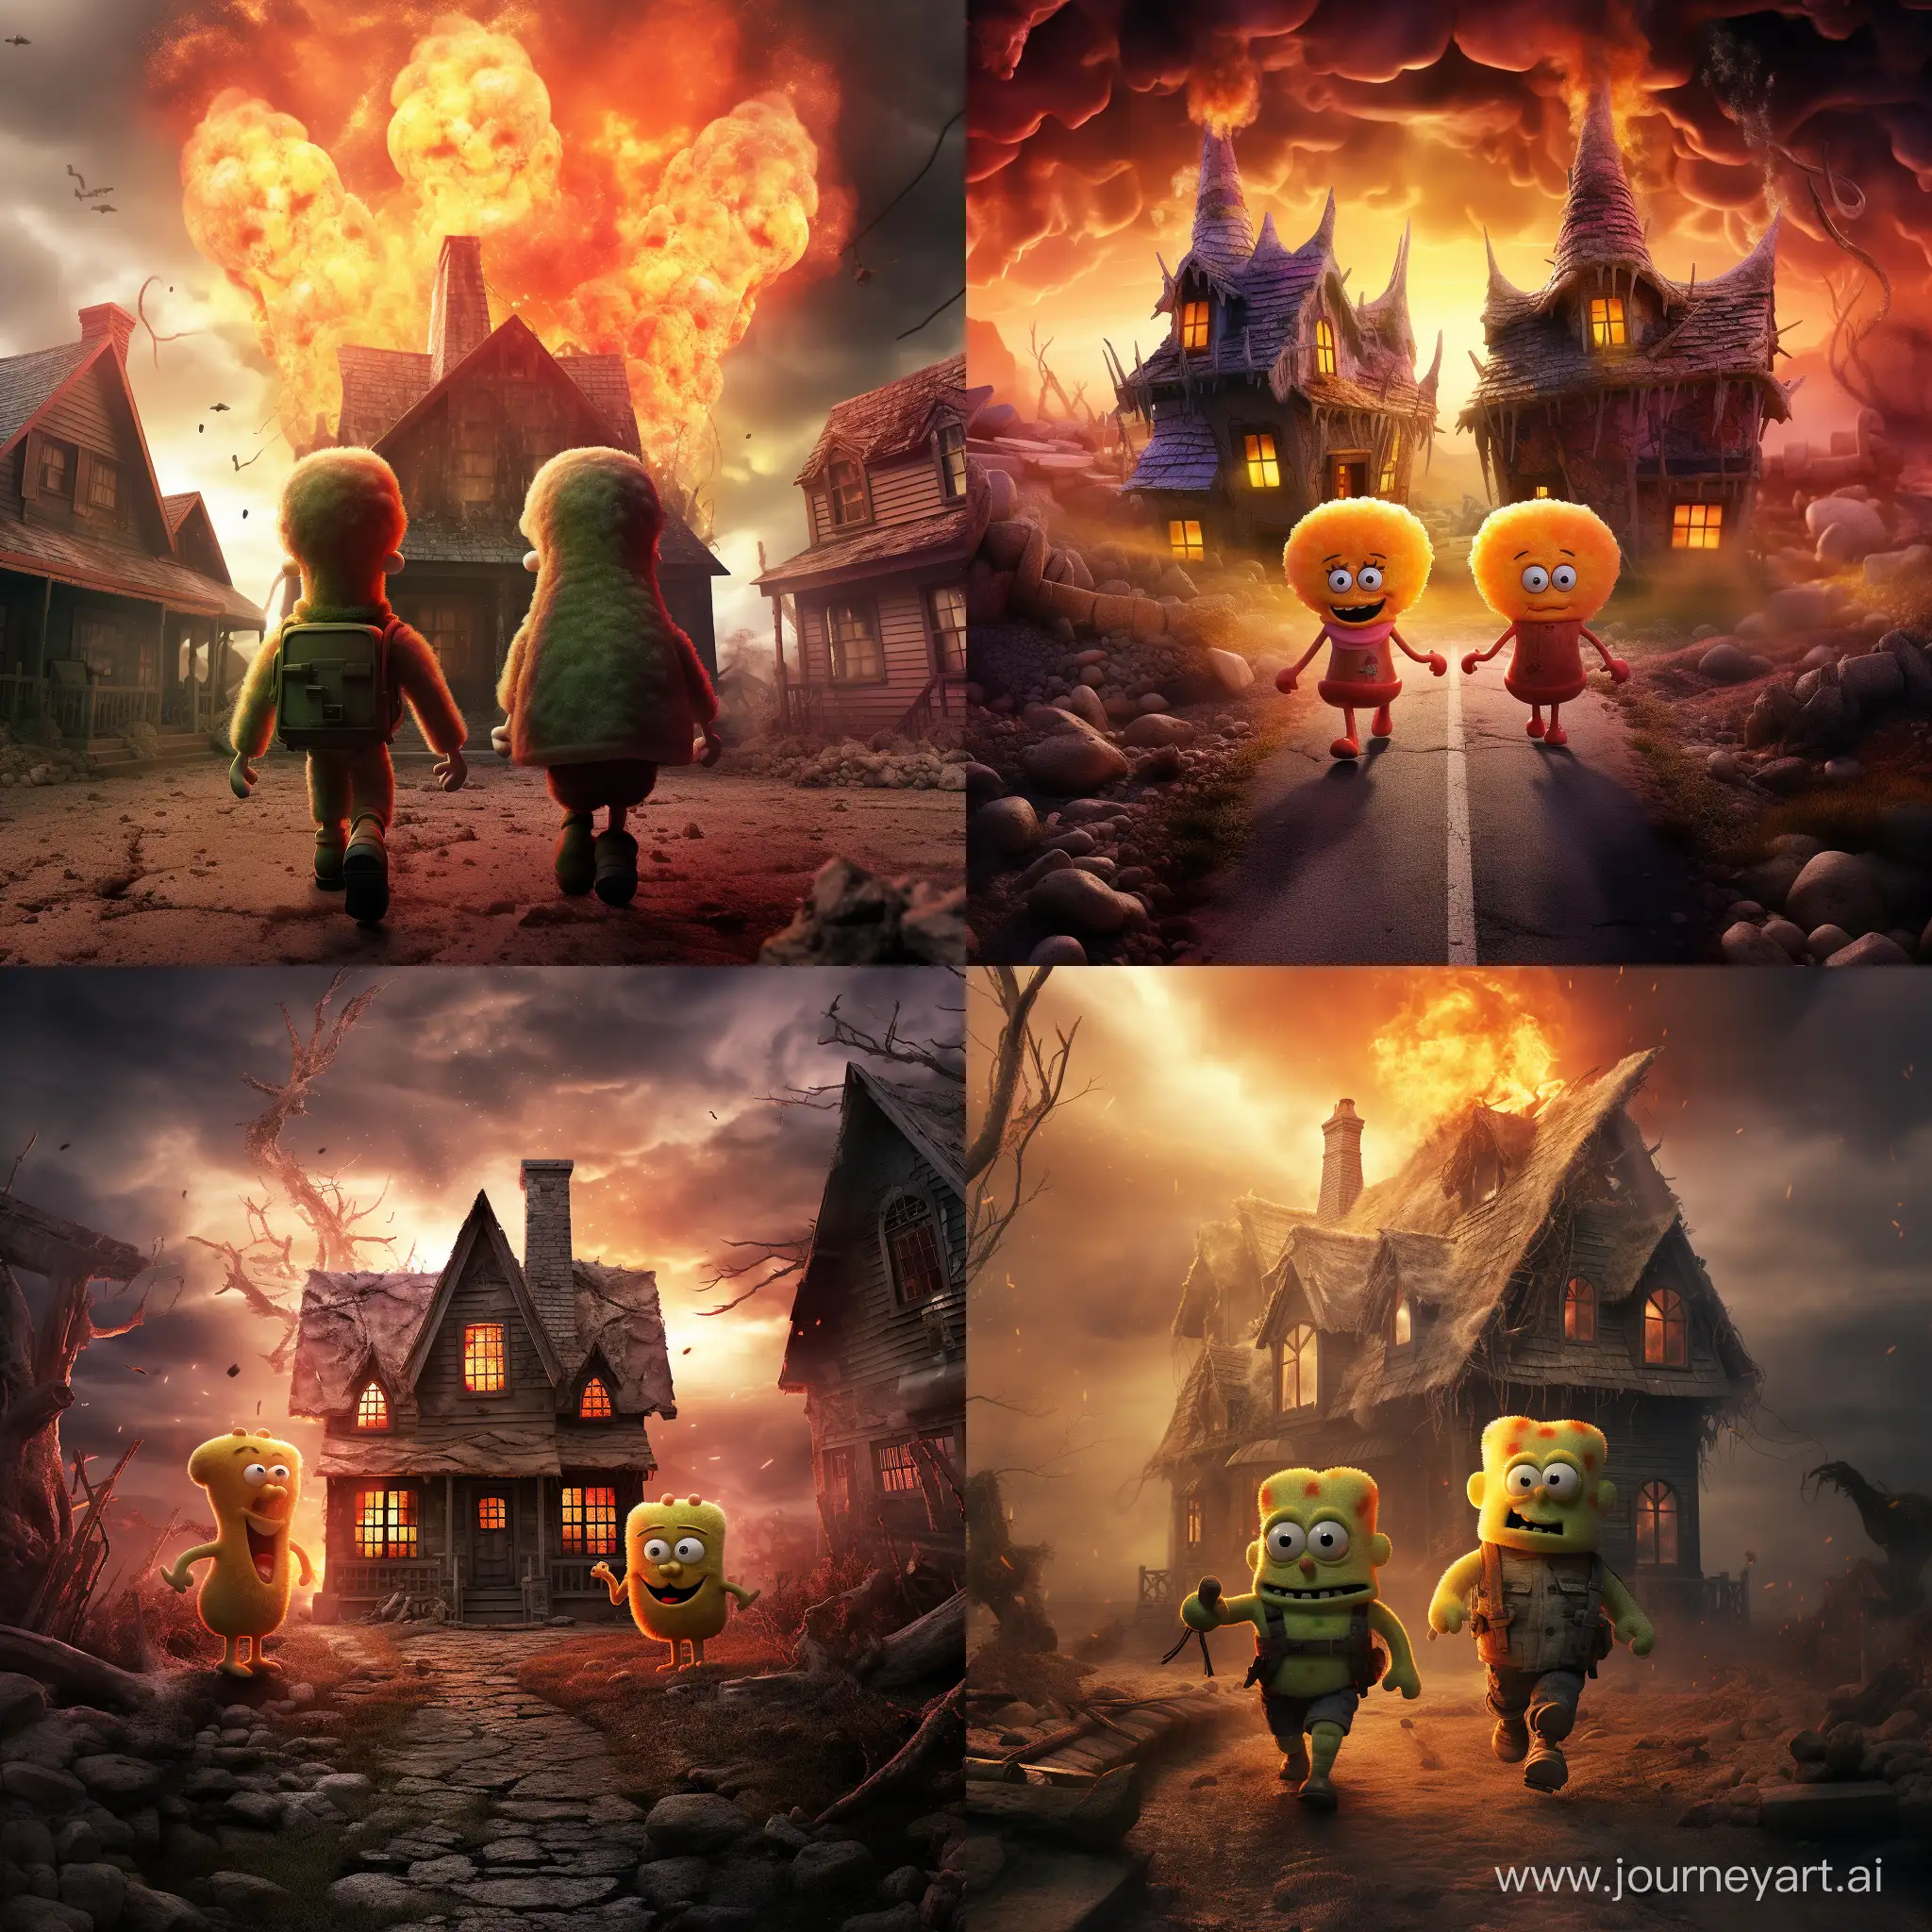 SpongeBob-and-Patrick-in-Intense-Stride-Amidst-House-Explosion